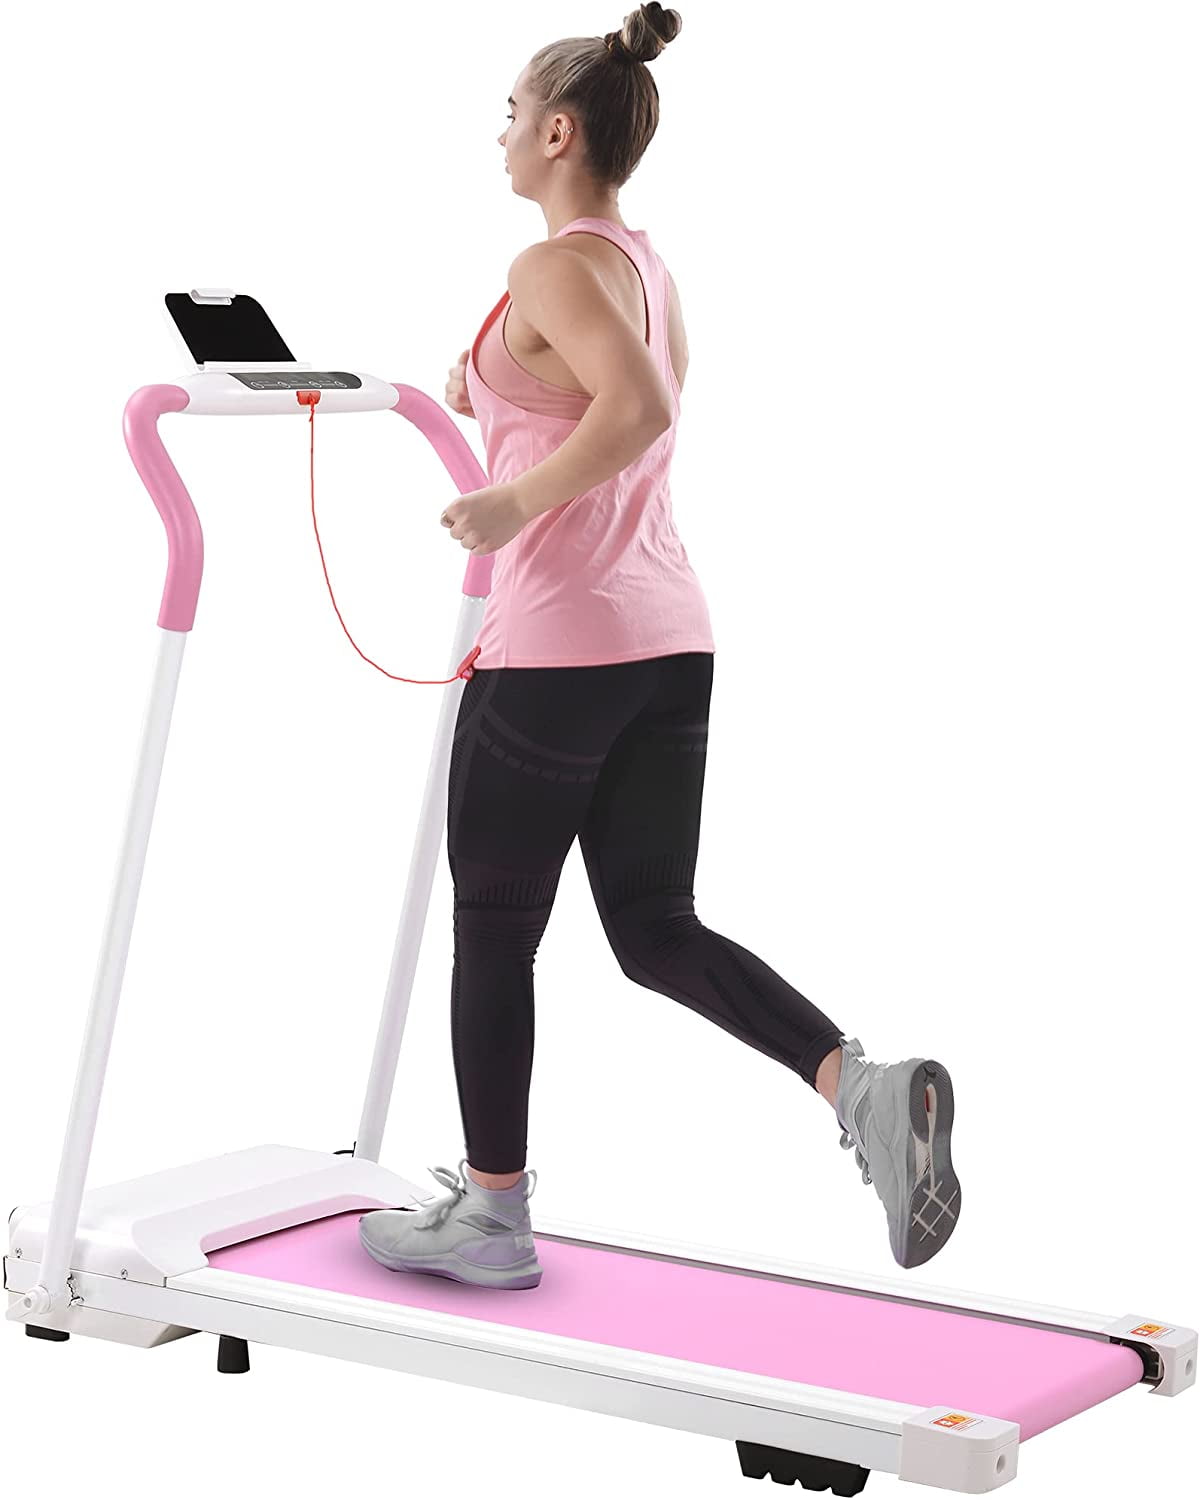 Fitness Running Machine. Details about   Electric Folding Treadmill for Home with LCD Monitor 